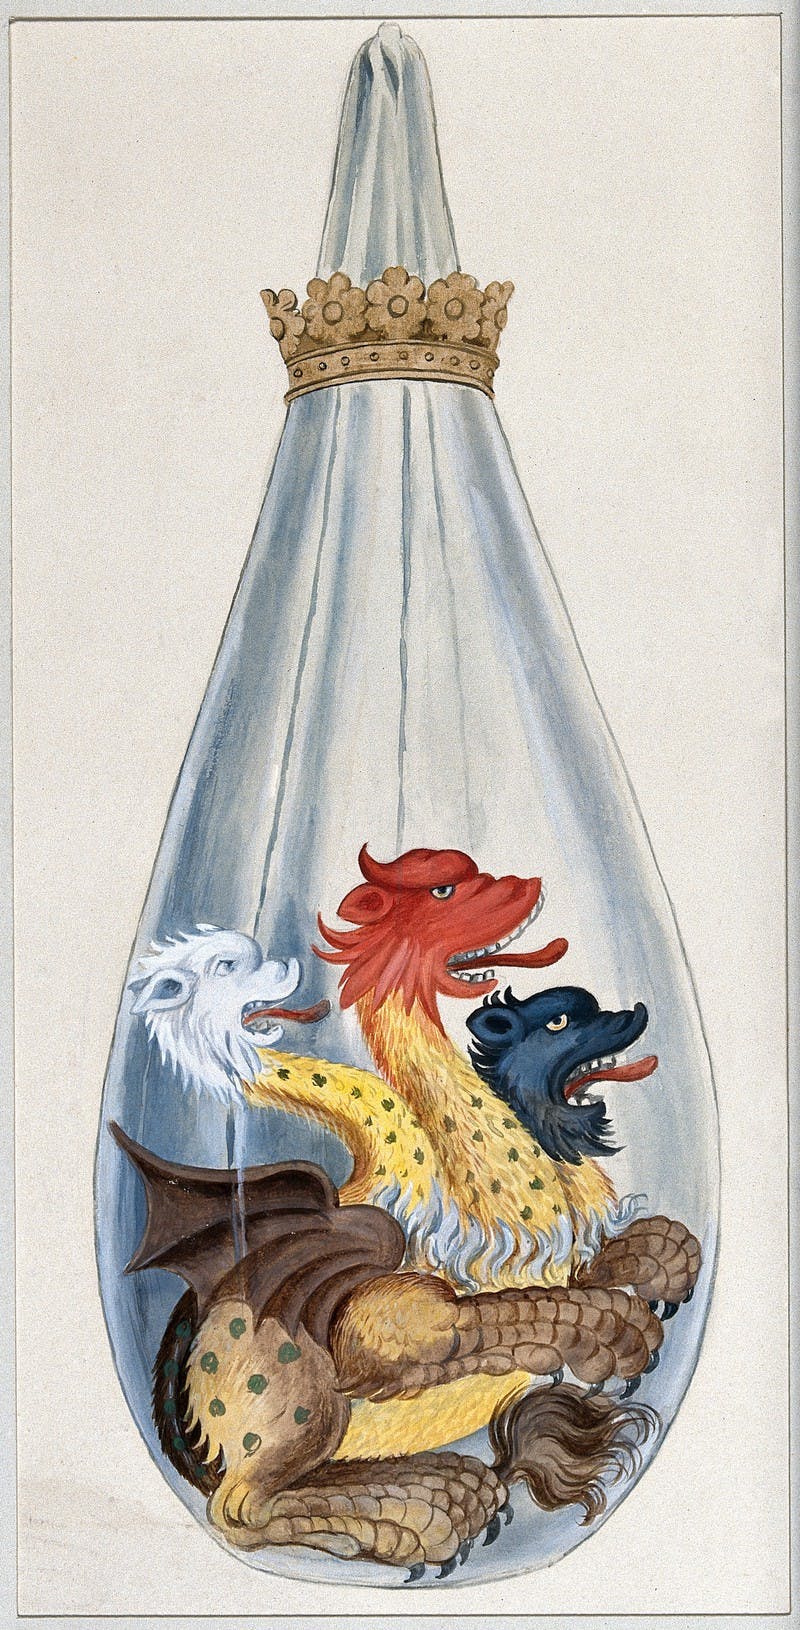 Watercolour of three-headed monster in a long blue sack-like flask